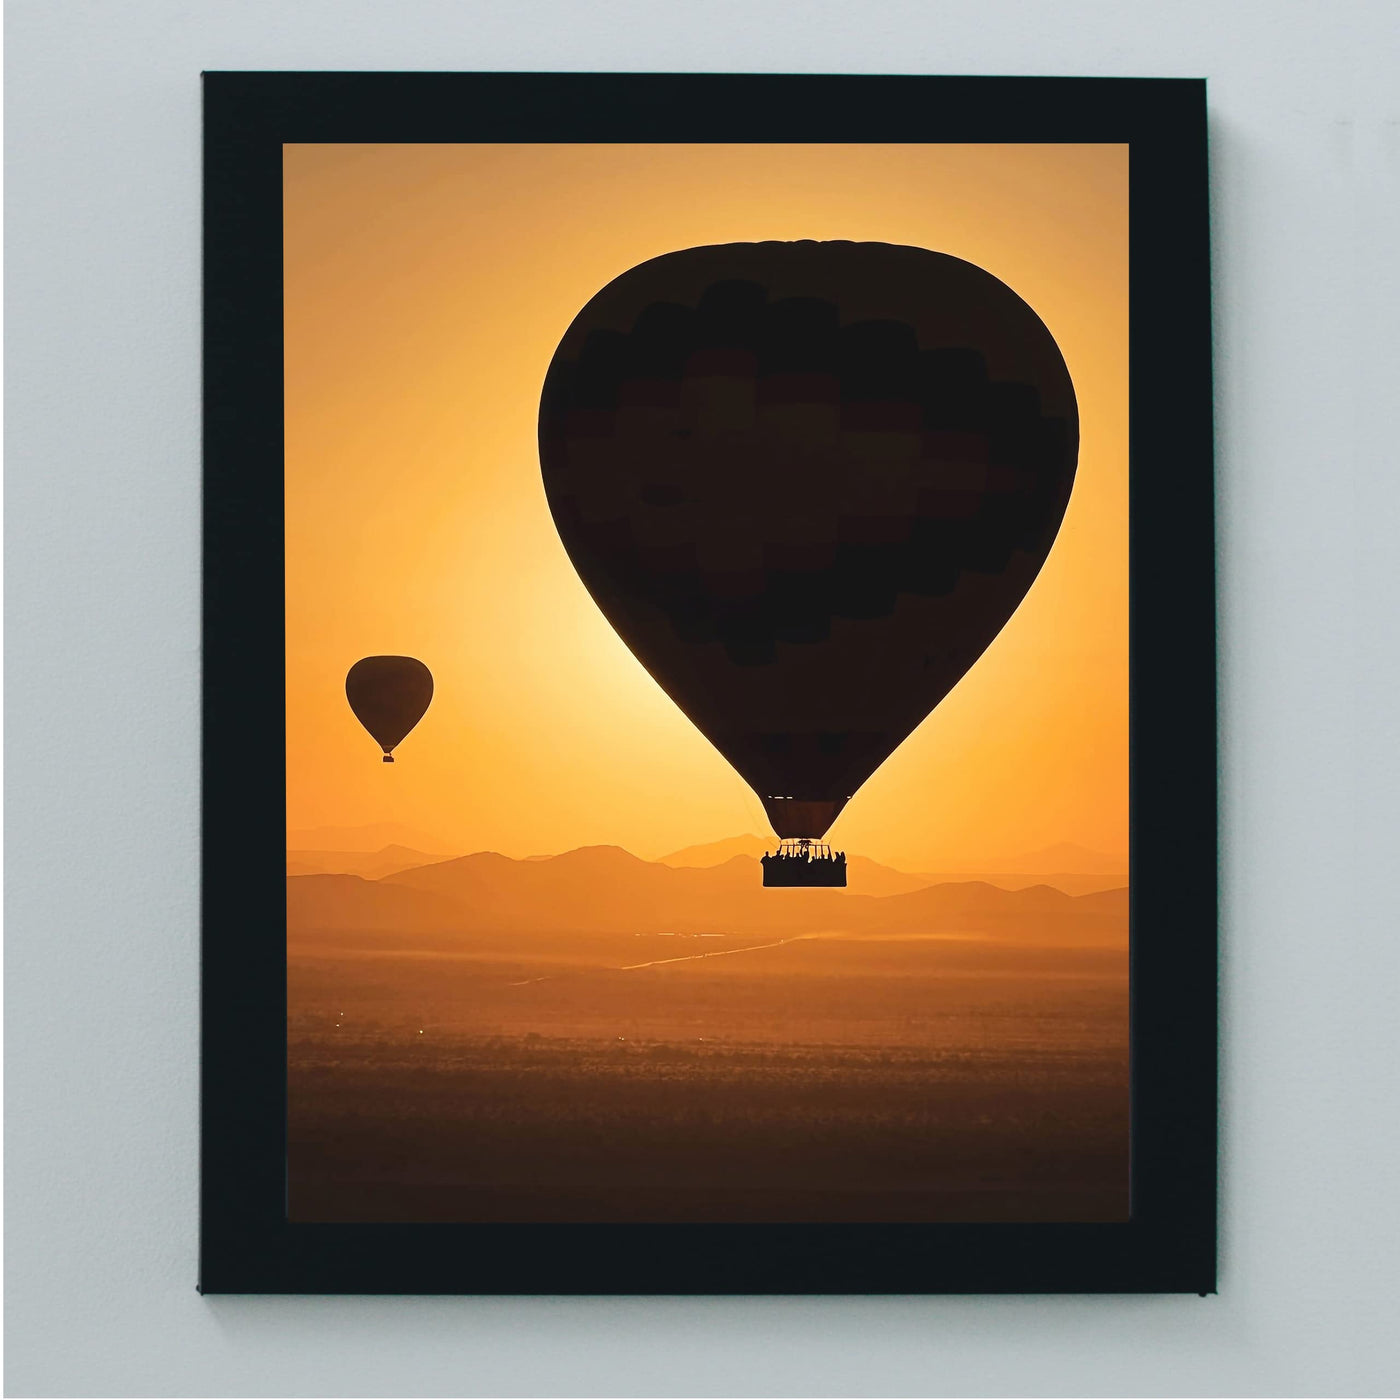 Sunset Hot Air Balloon Ride- Inspirational Wall Art -8 x 10" Balloons Picture Print -Ready to Frame. Perfect Decoration for Home-Office-Studio-Classroom Decor. Great Gift for Flight Enthusiasts!